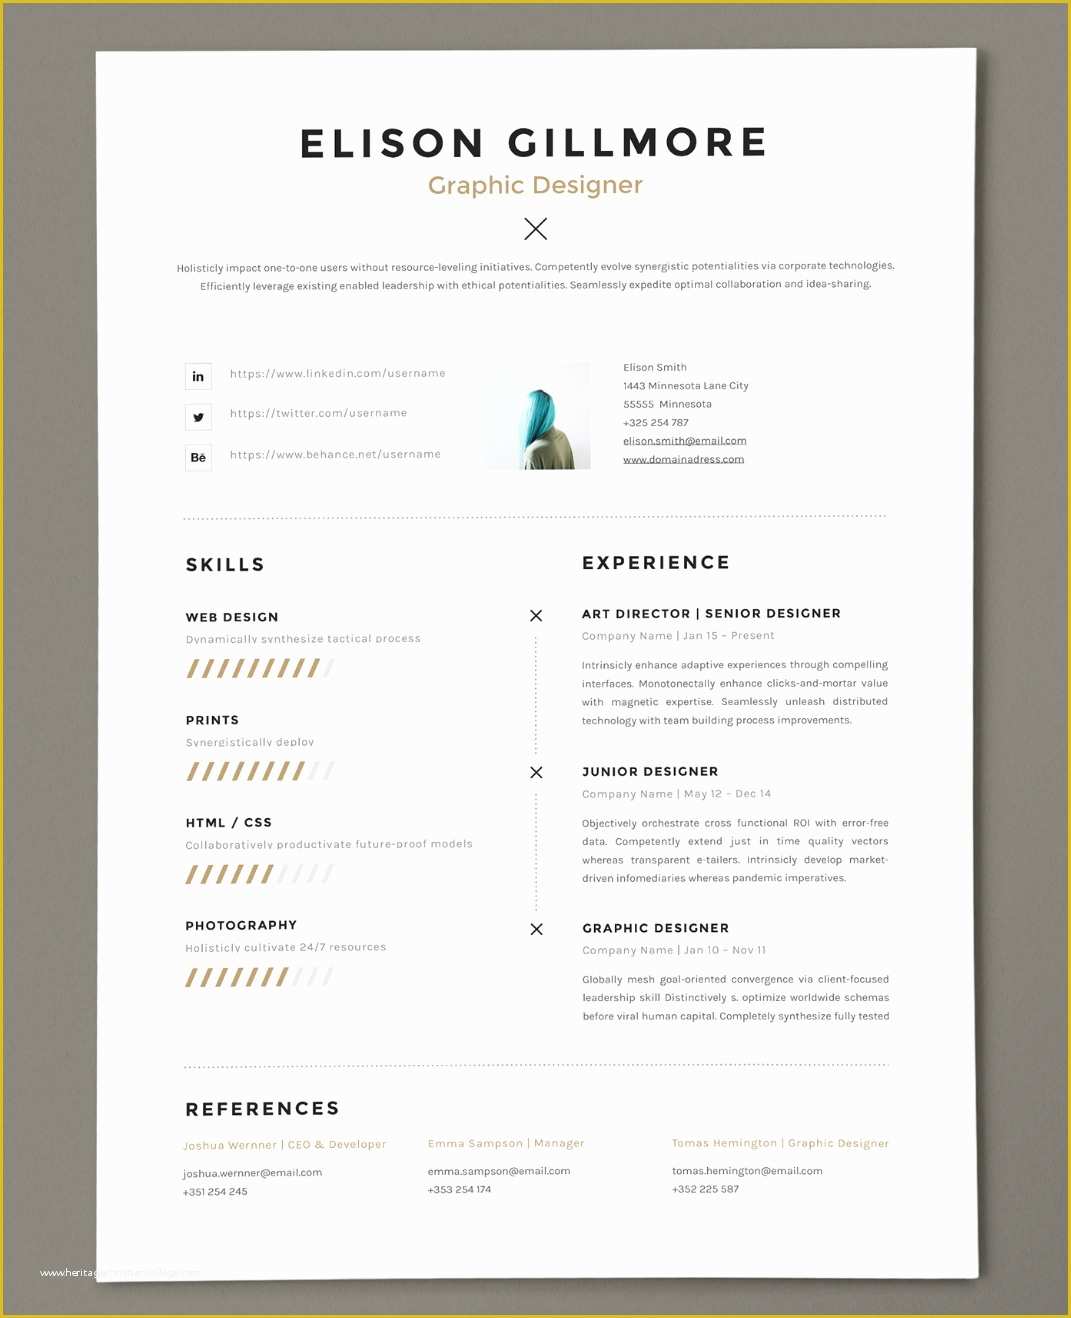 Resume Templates 2018 Free Of Improve Your Resume Template 2019 to Get Noticed